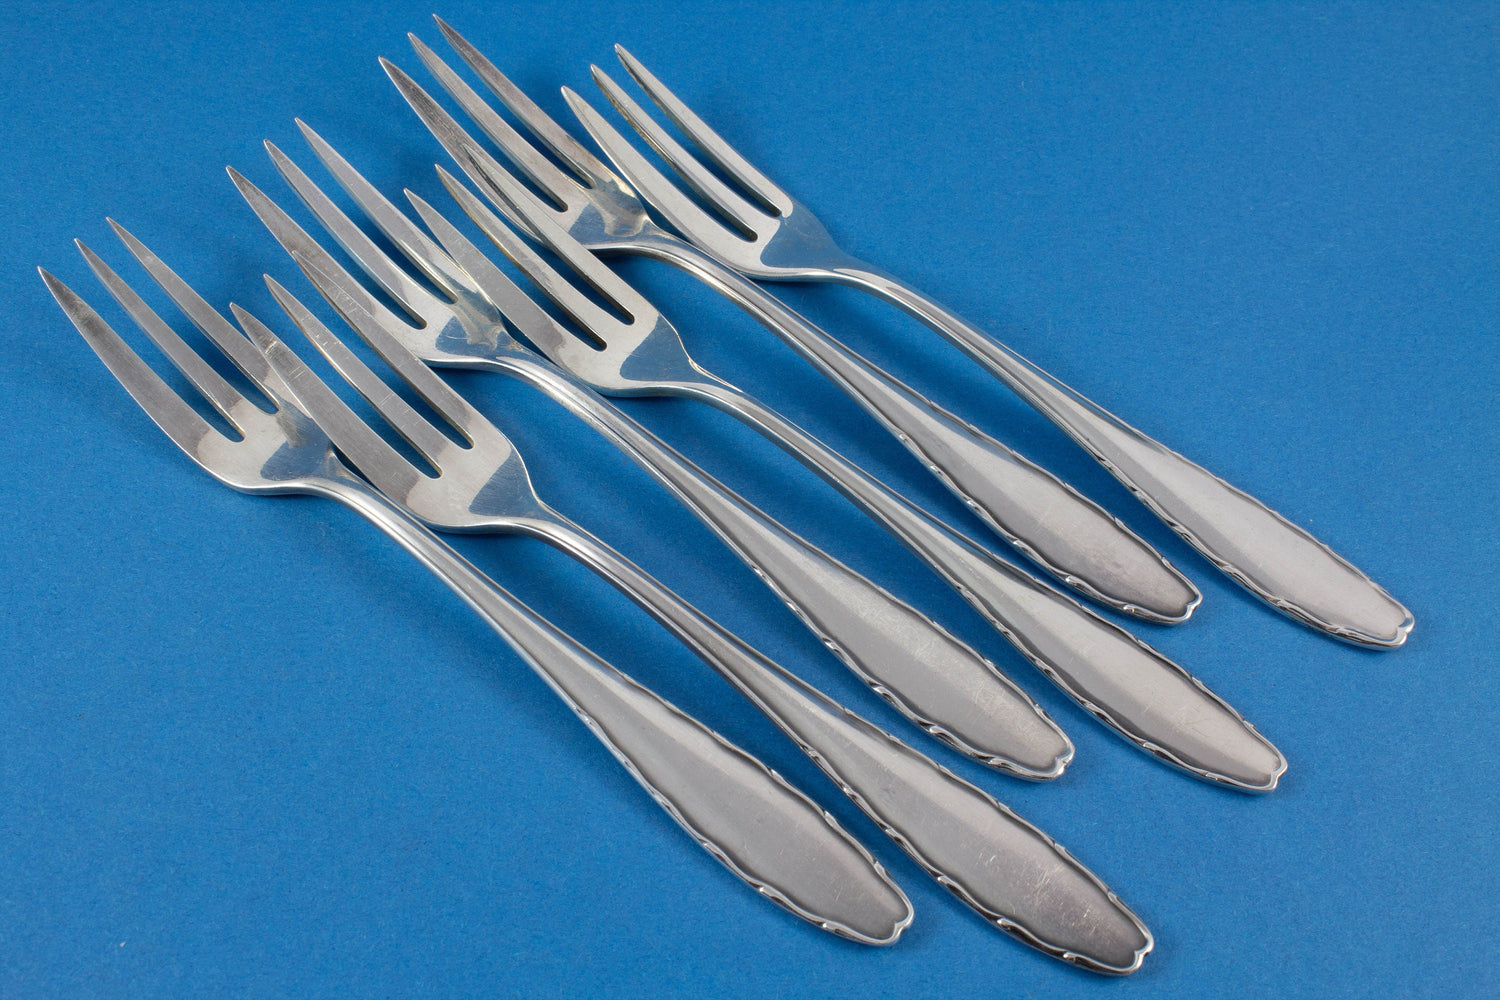 6 beautiful cake forks from WMF, WMF 2300